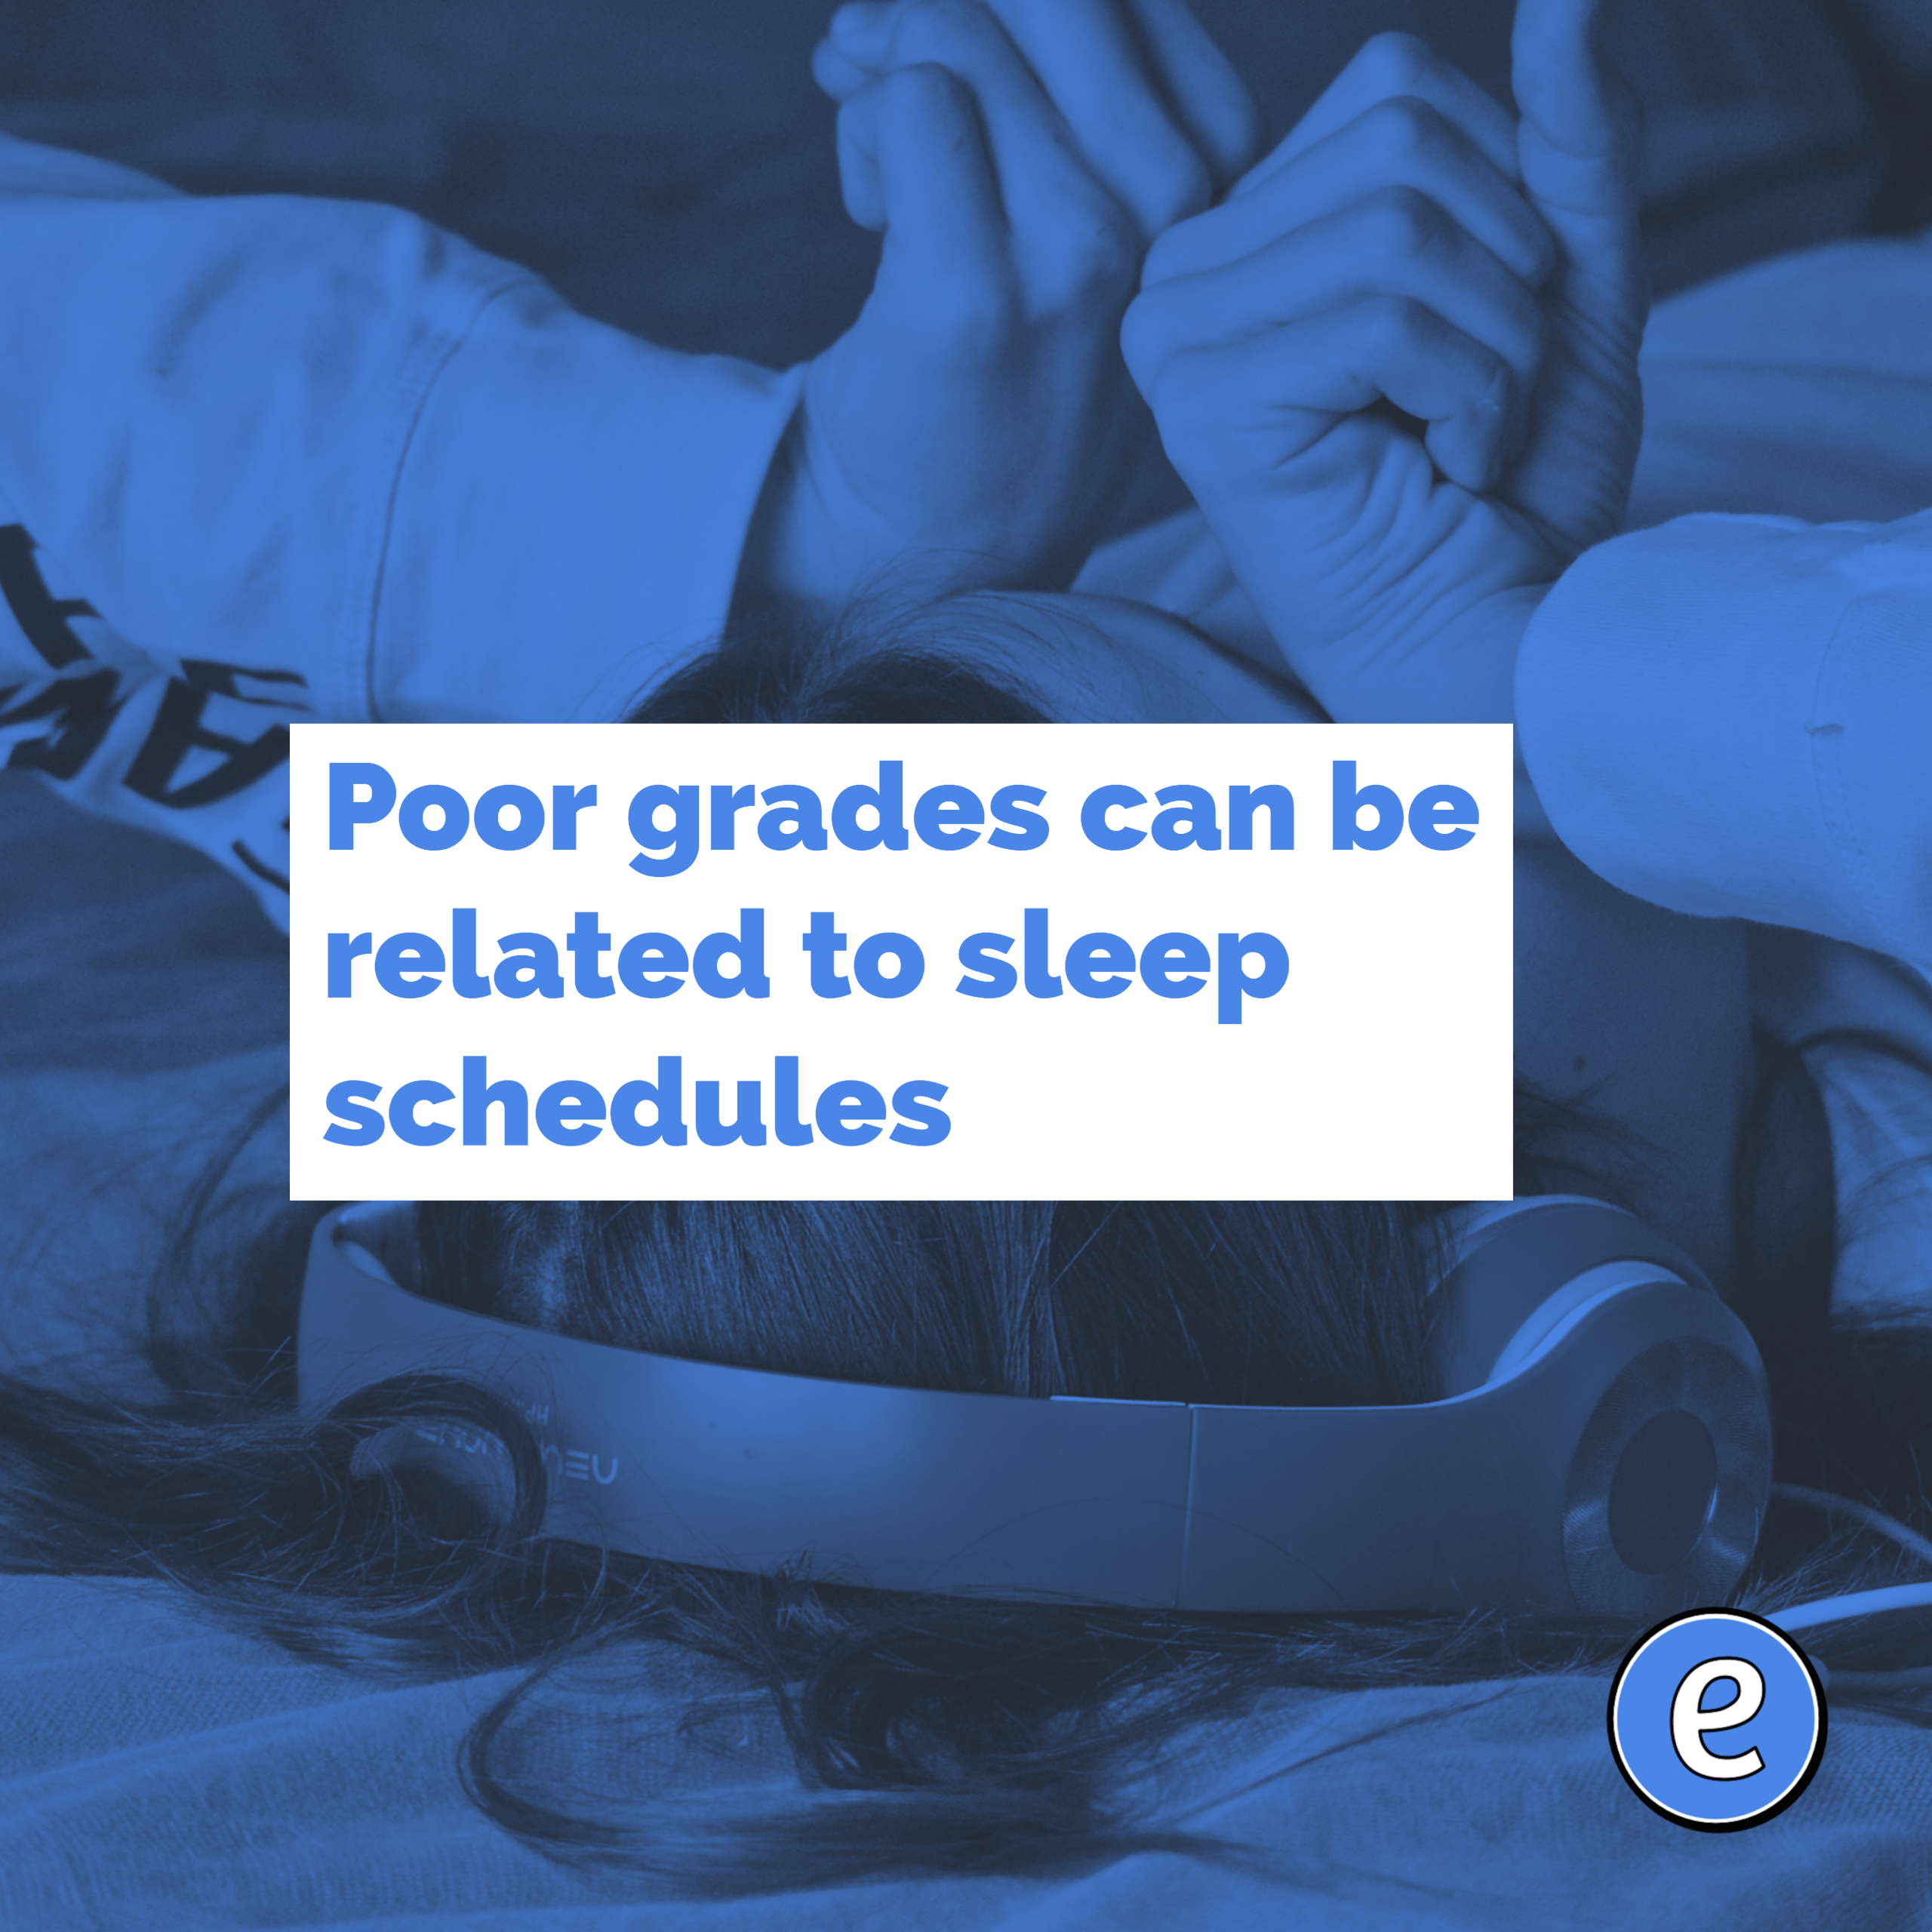 Poor grades can be related to sleep schedules